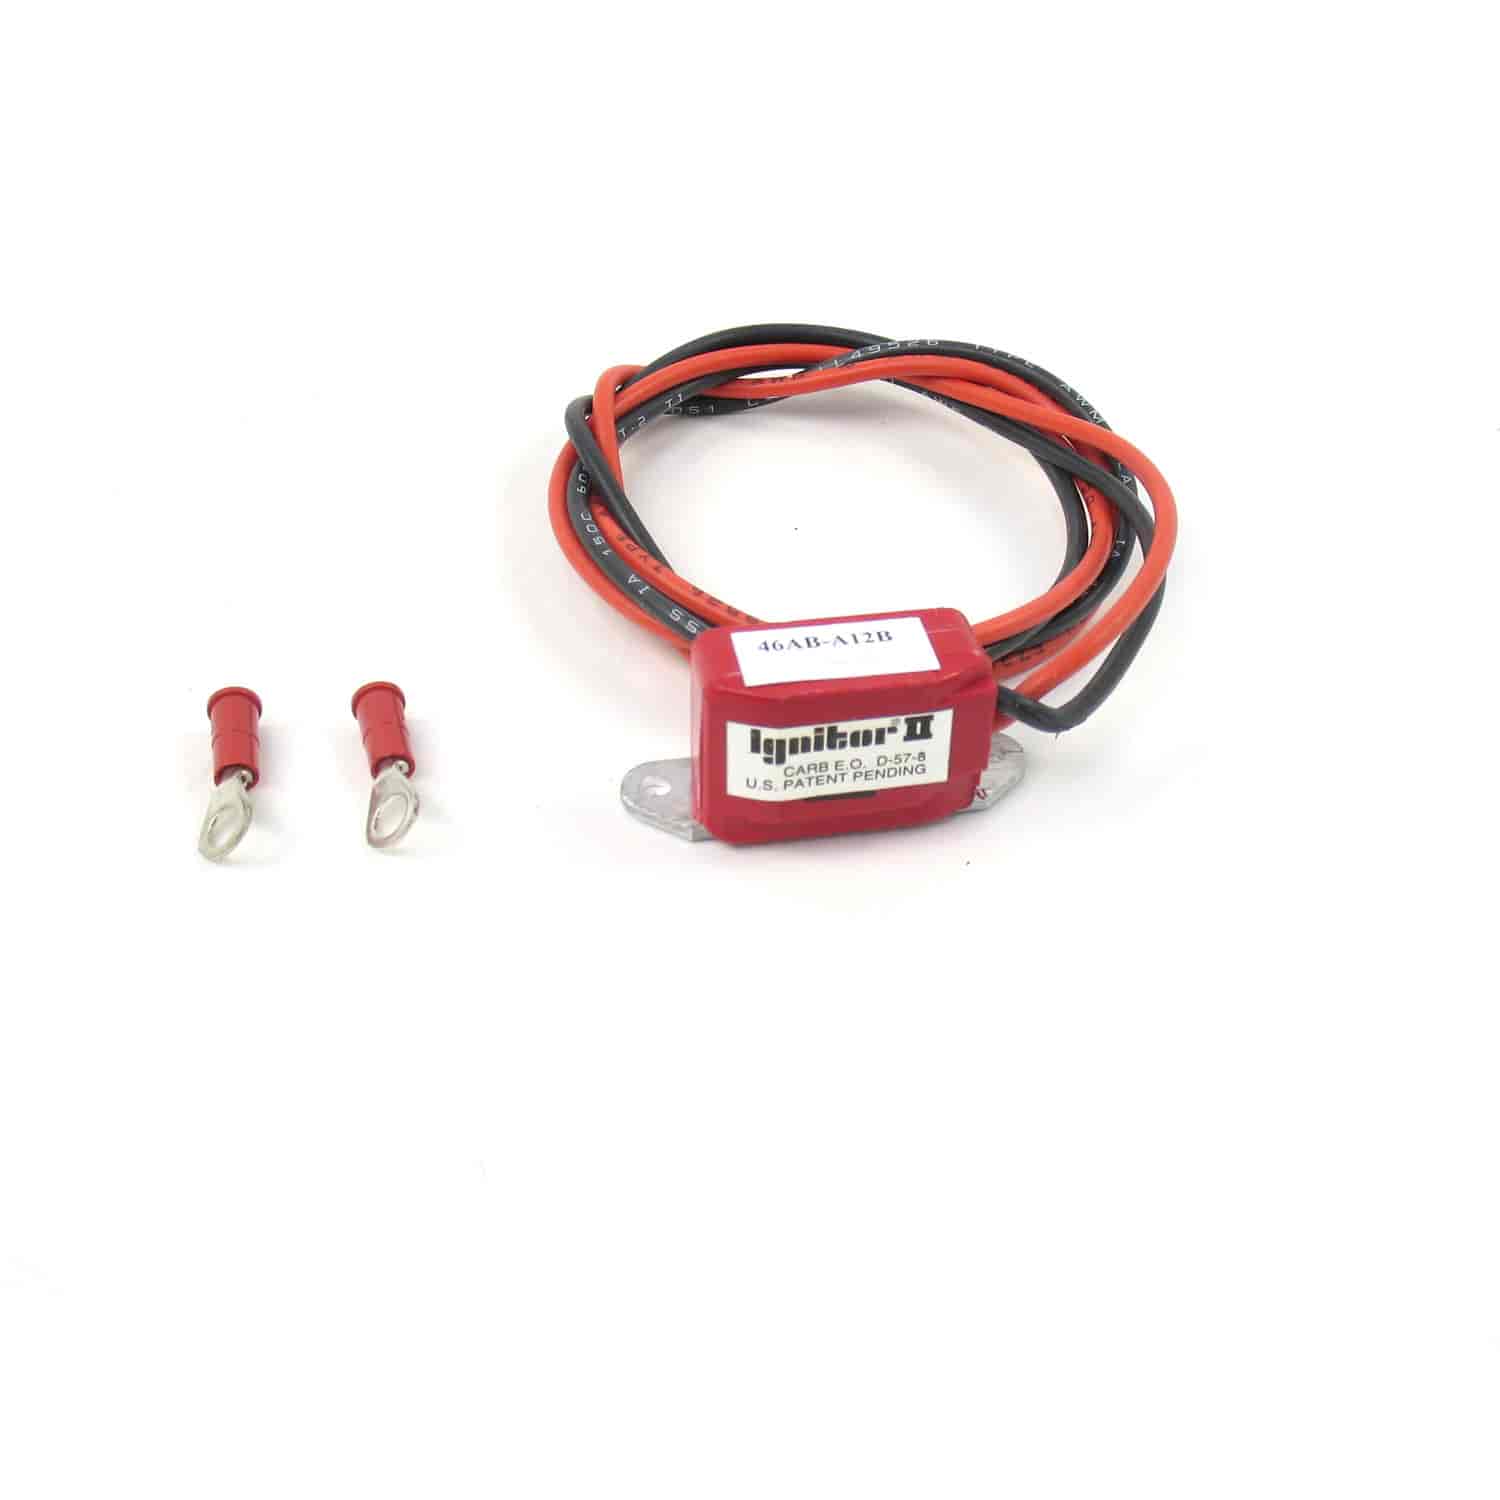 Replacement Module for Ignitor II Flame-Thrower VW